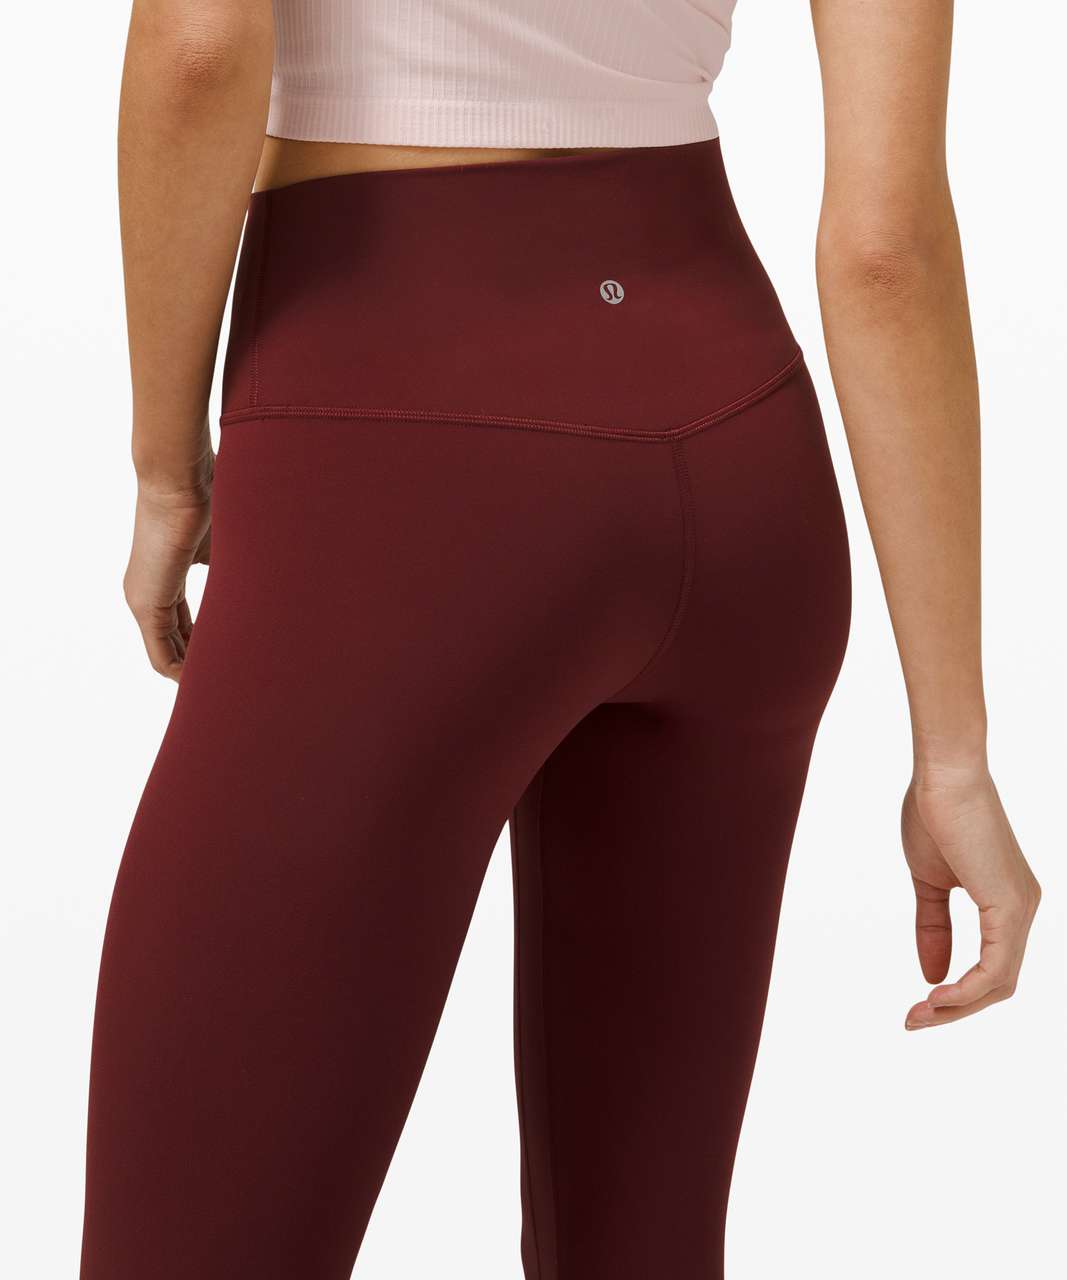 Leggings Lululemon Red size 4 US in Not specified - 25723075